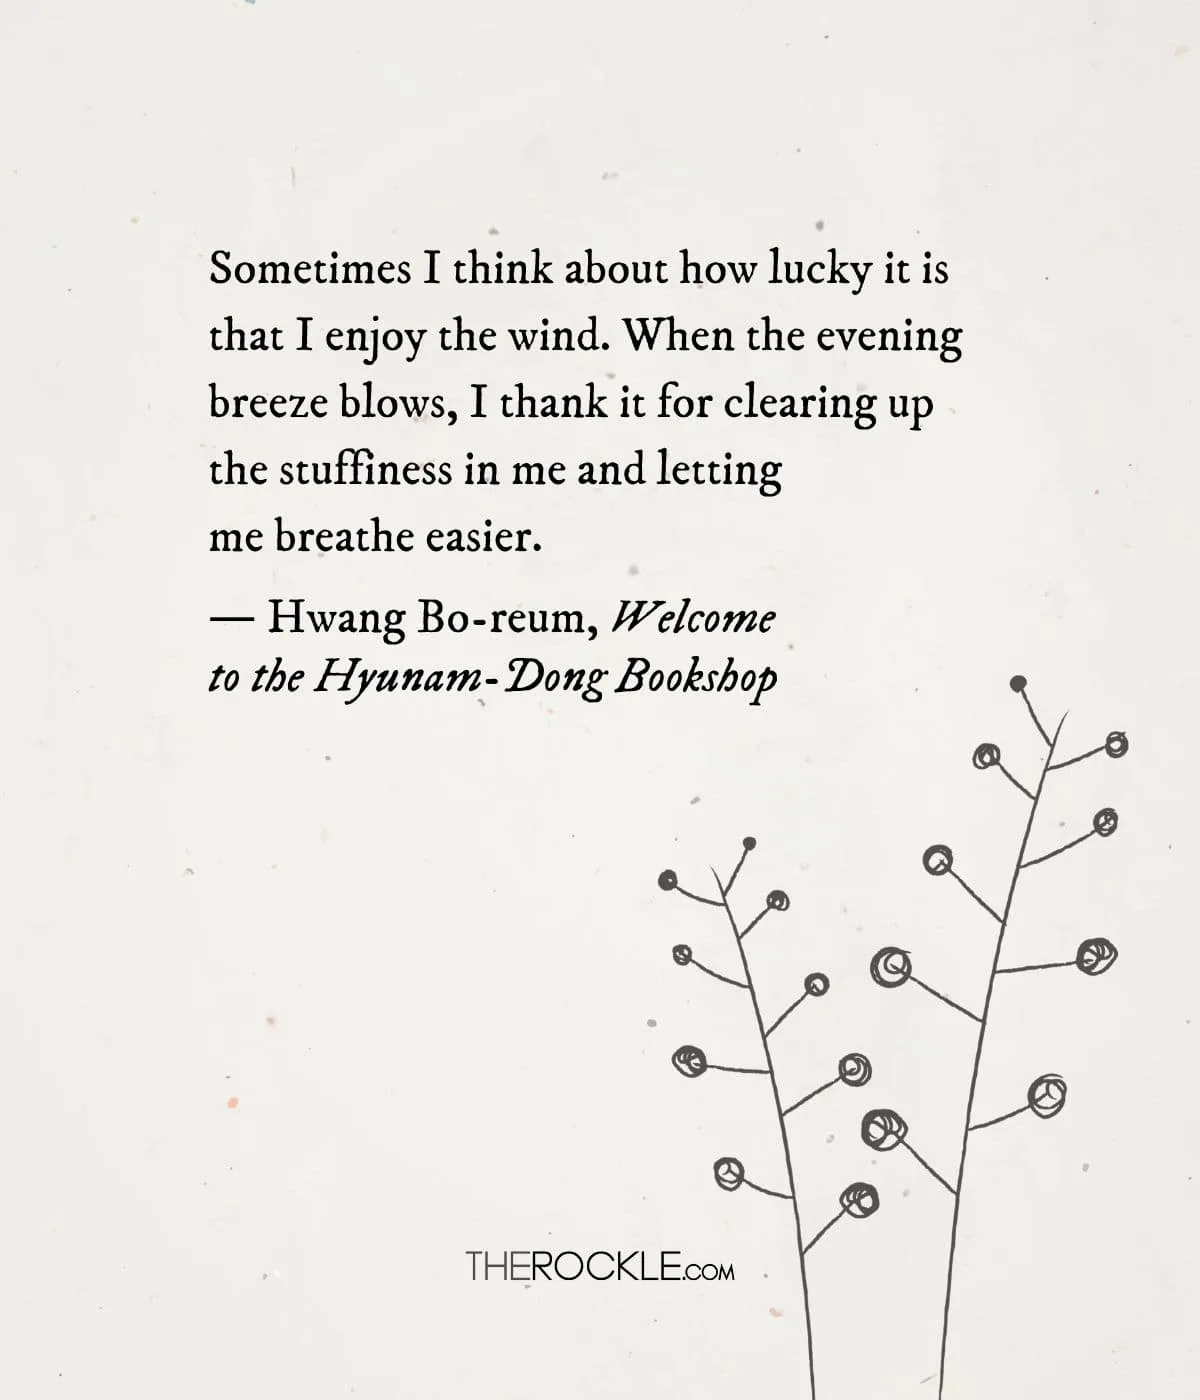 Hwang Bo-reum's book quote on finding solace in simple pleasures